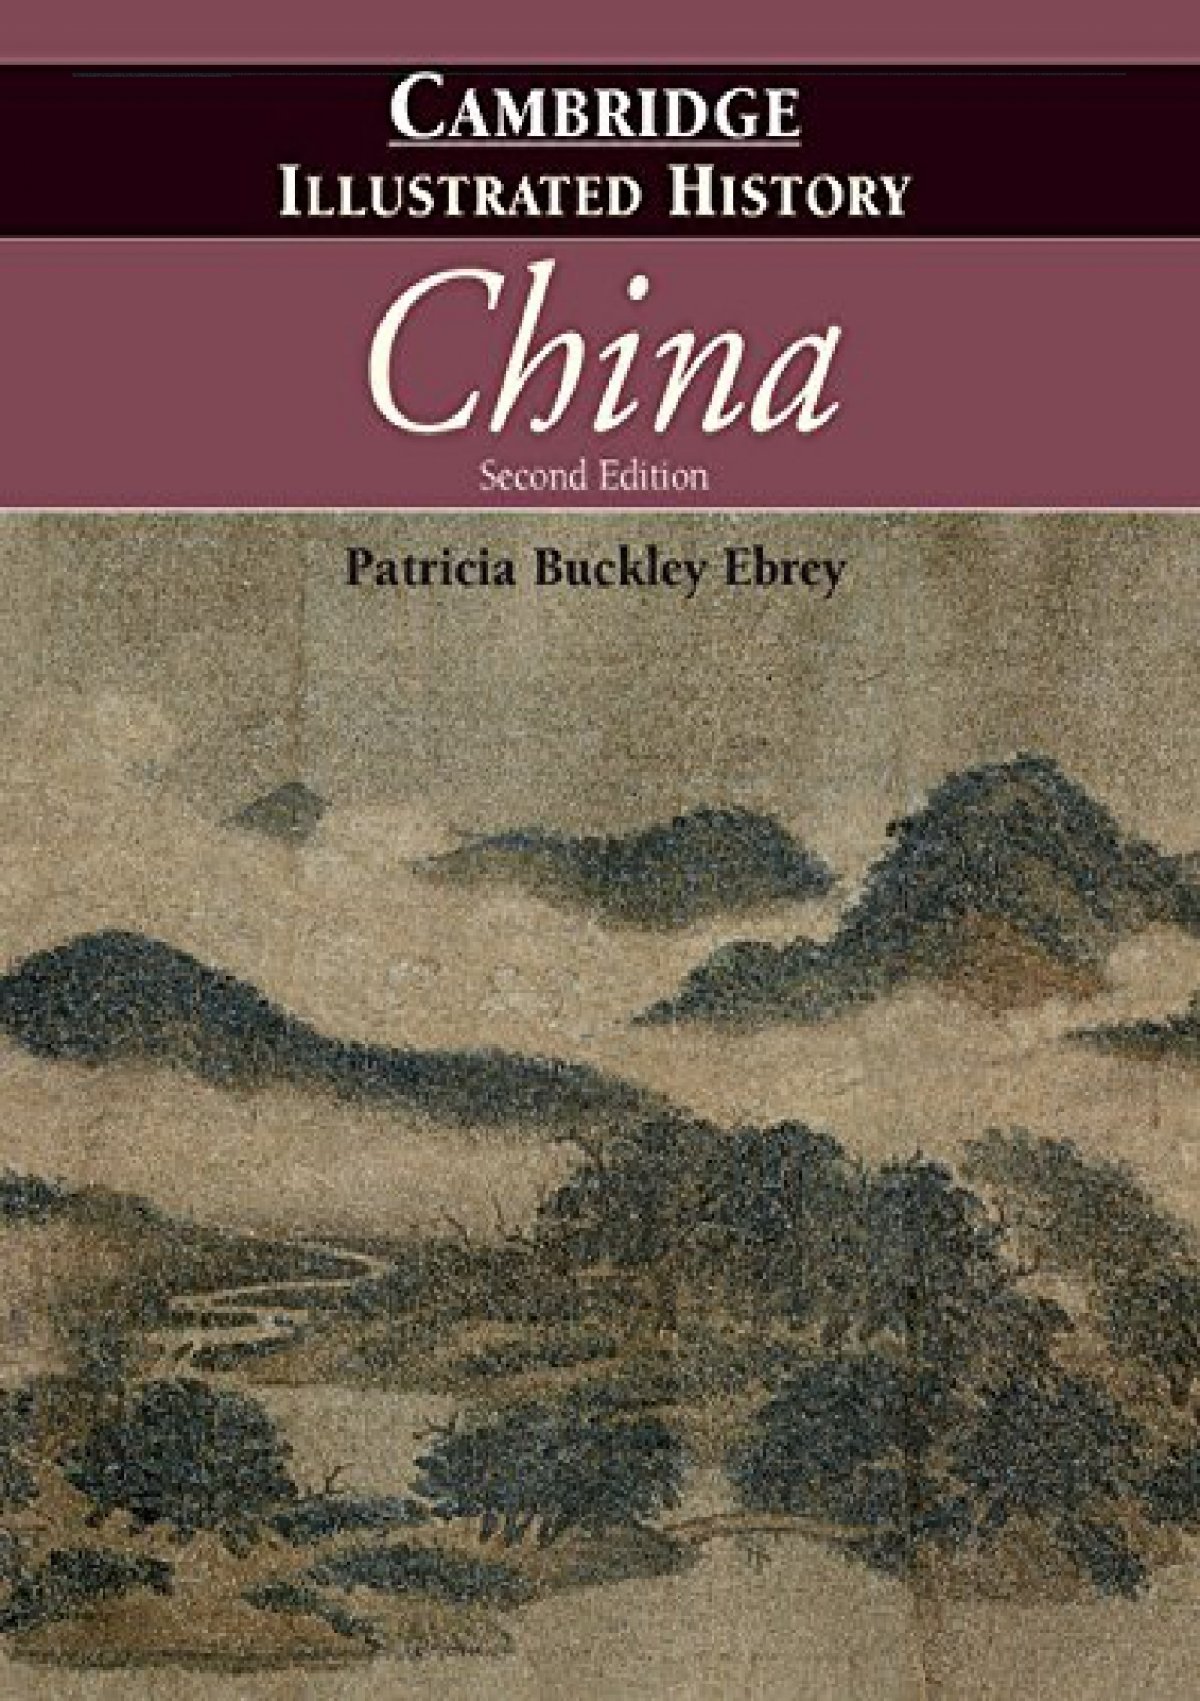 the cambridge illustrated history of china download